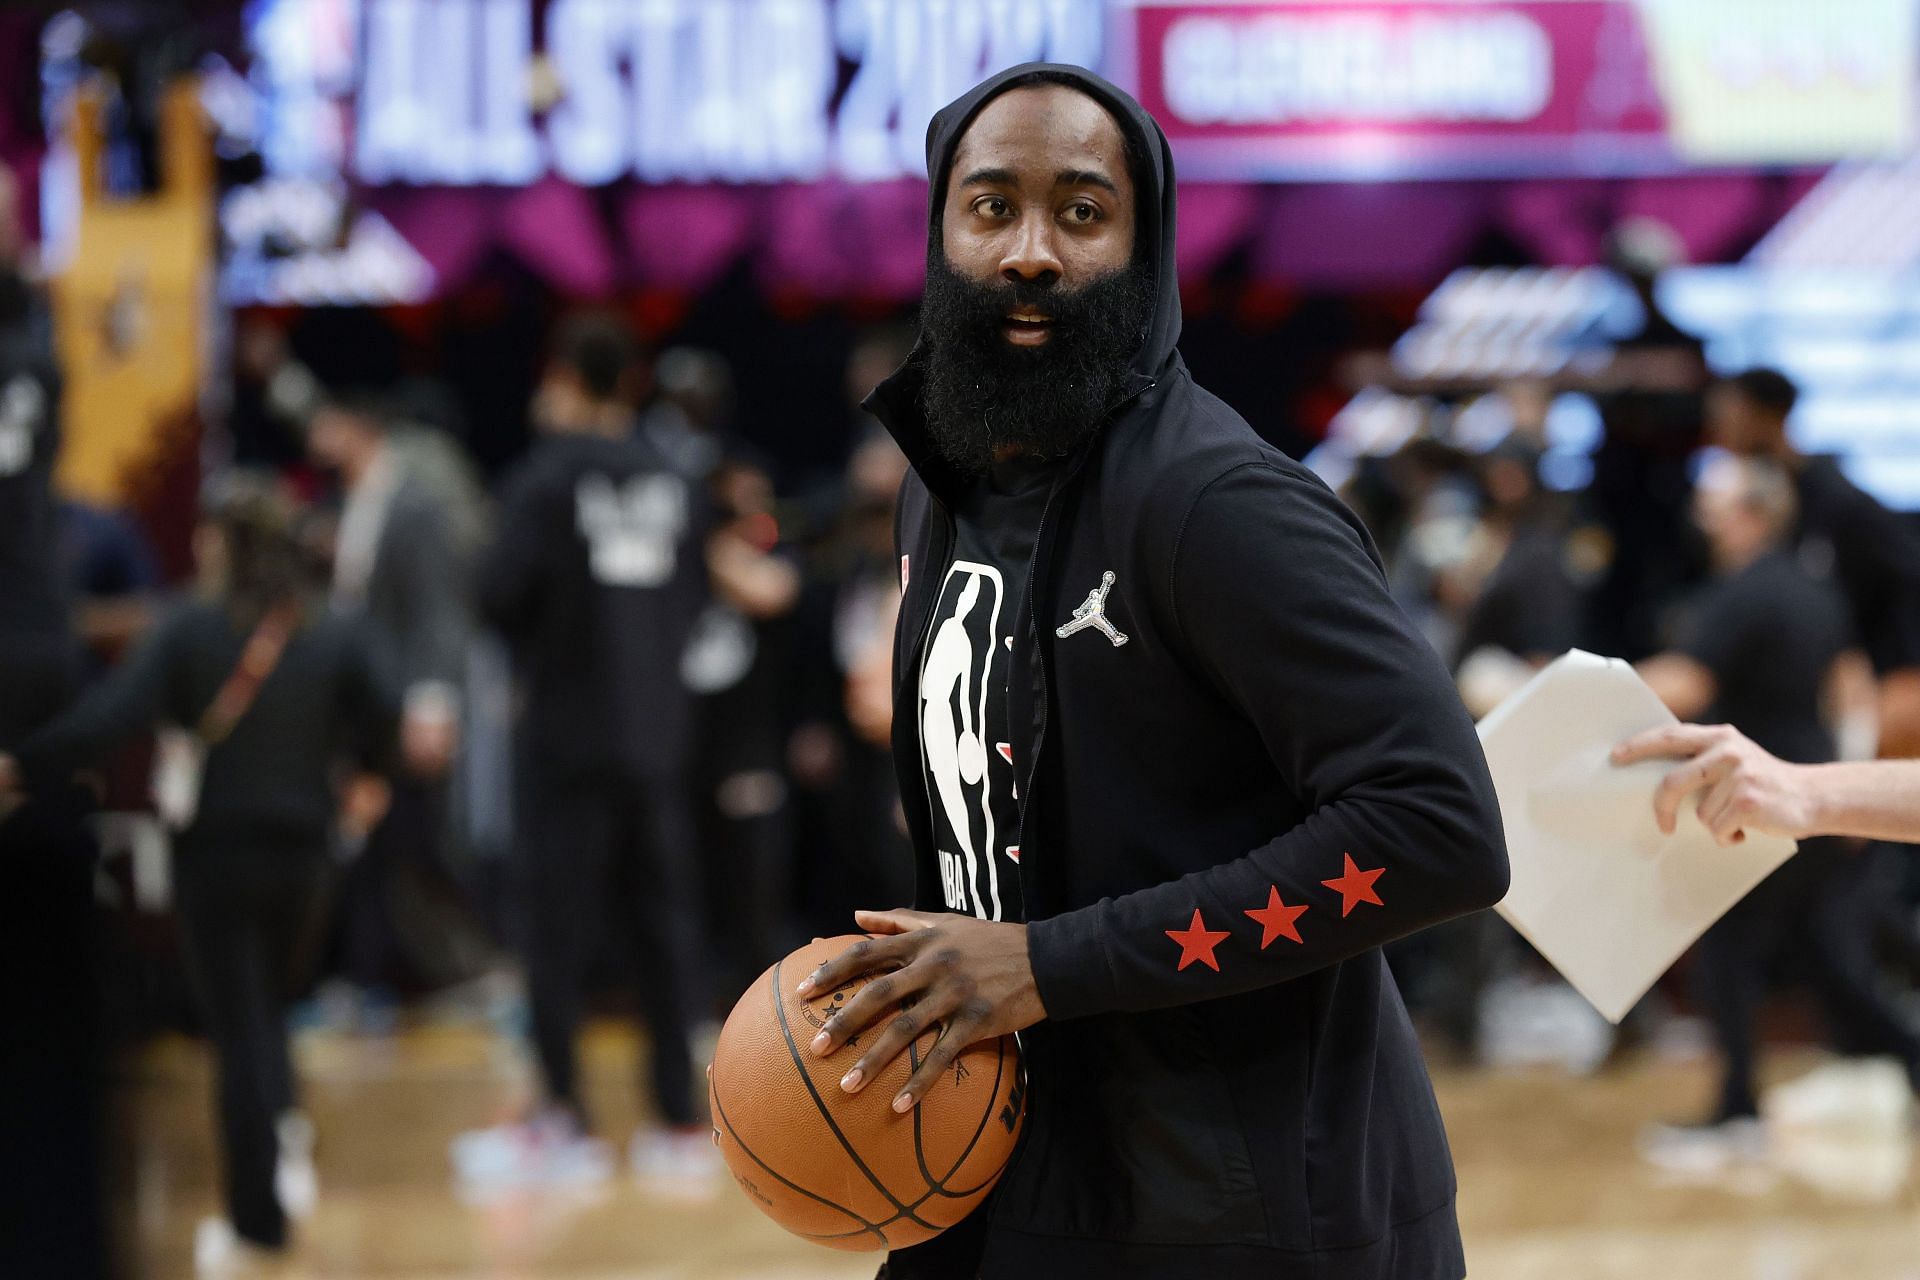 2022 NBA All-Star Game: Harden warming up with Team LeBron